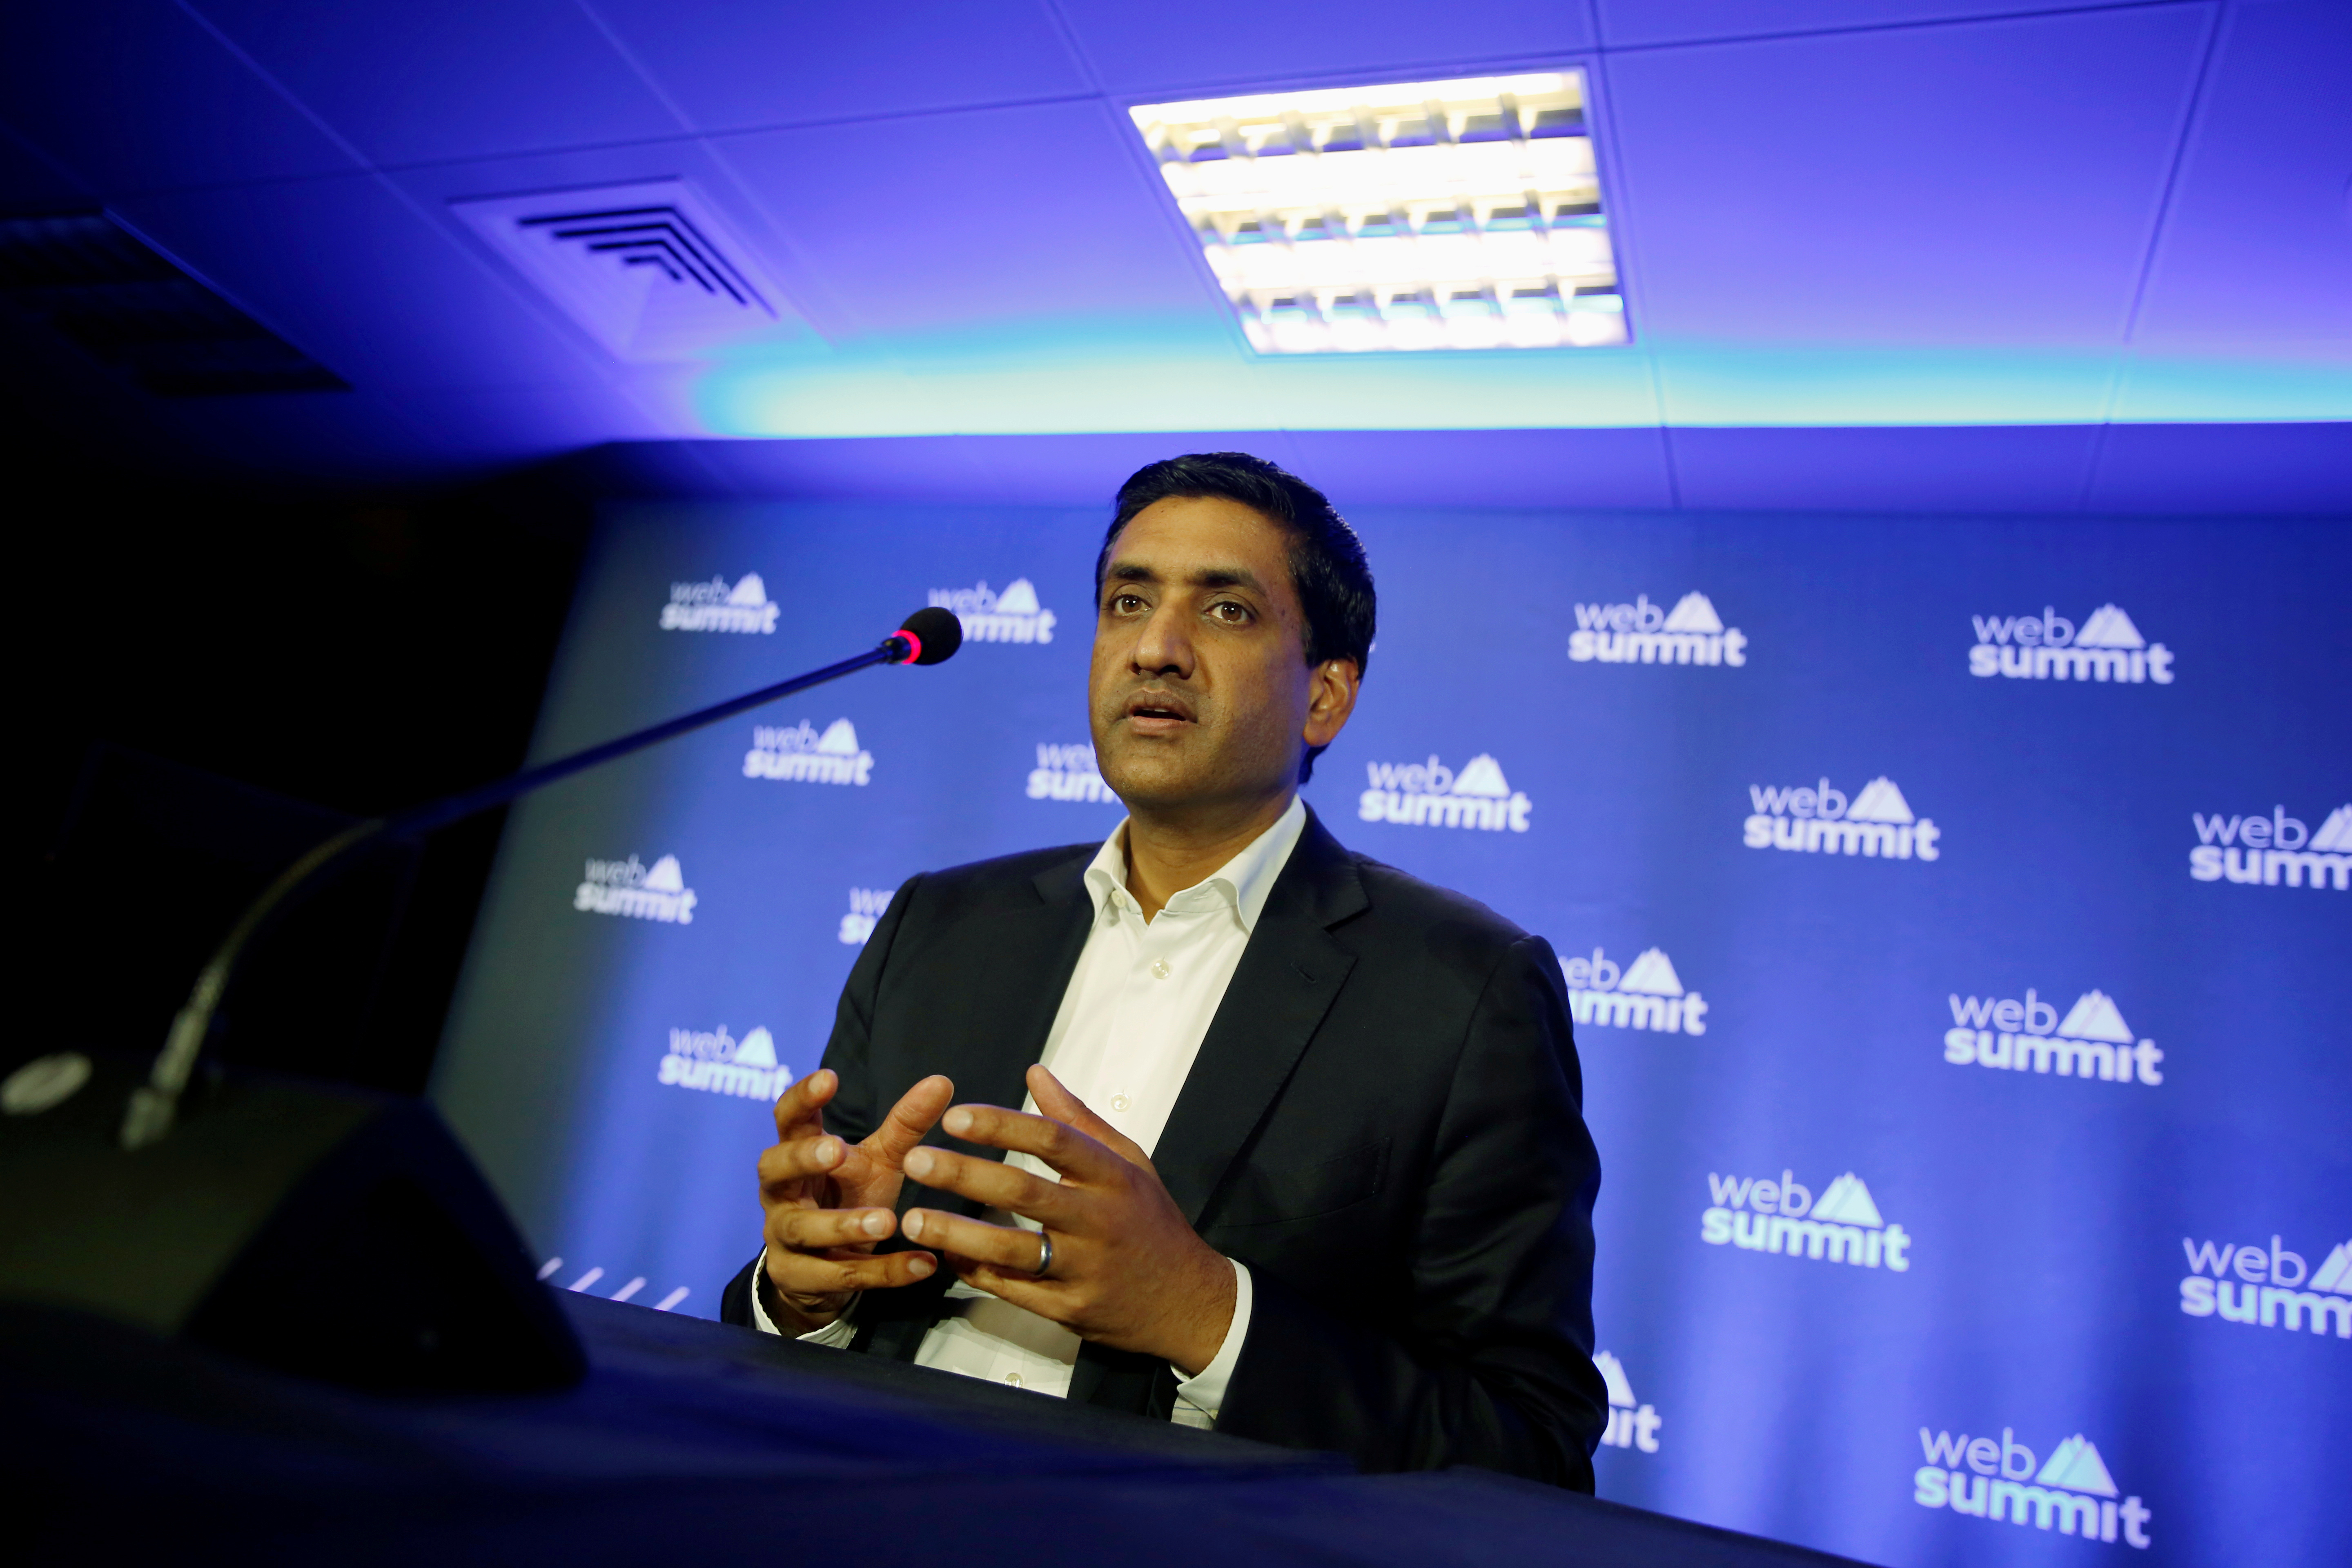 US Democratic Representative Ro Khanna, vice chair of the 98-member Congressional Progressive Caucus, holds a news conference during Web Summit, in Lisbon, Portugal, November 6, 2019. REUTERS/Pedro Nunes/File Photo